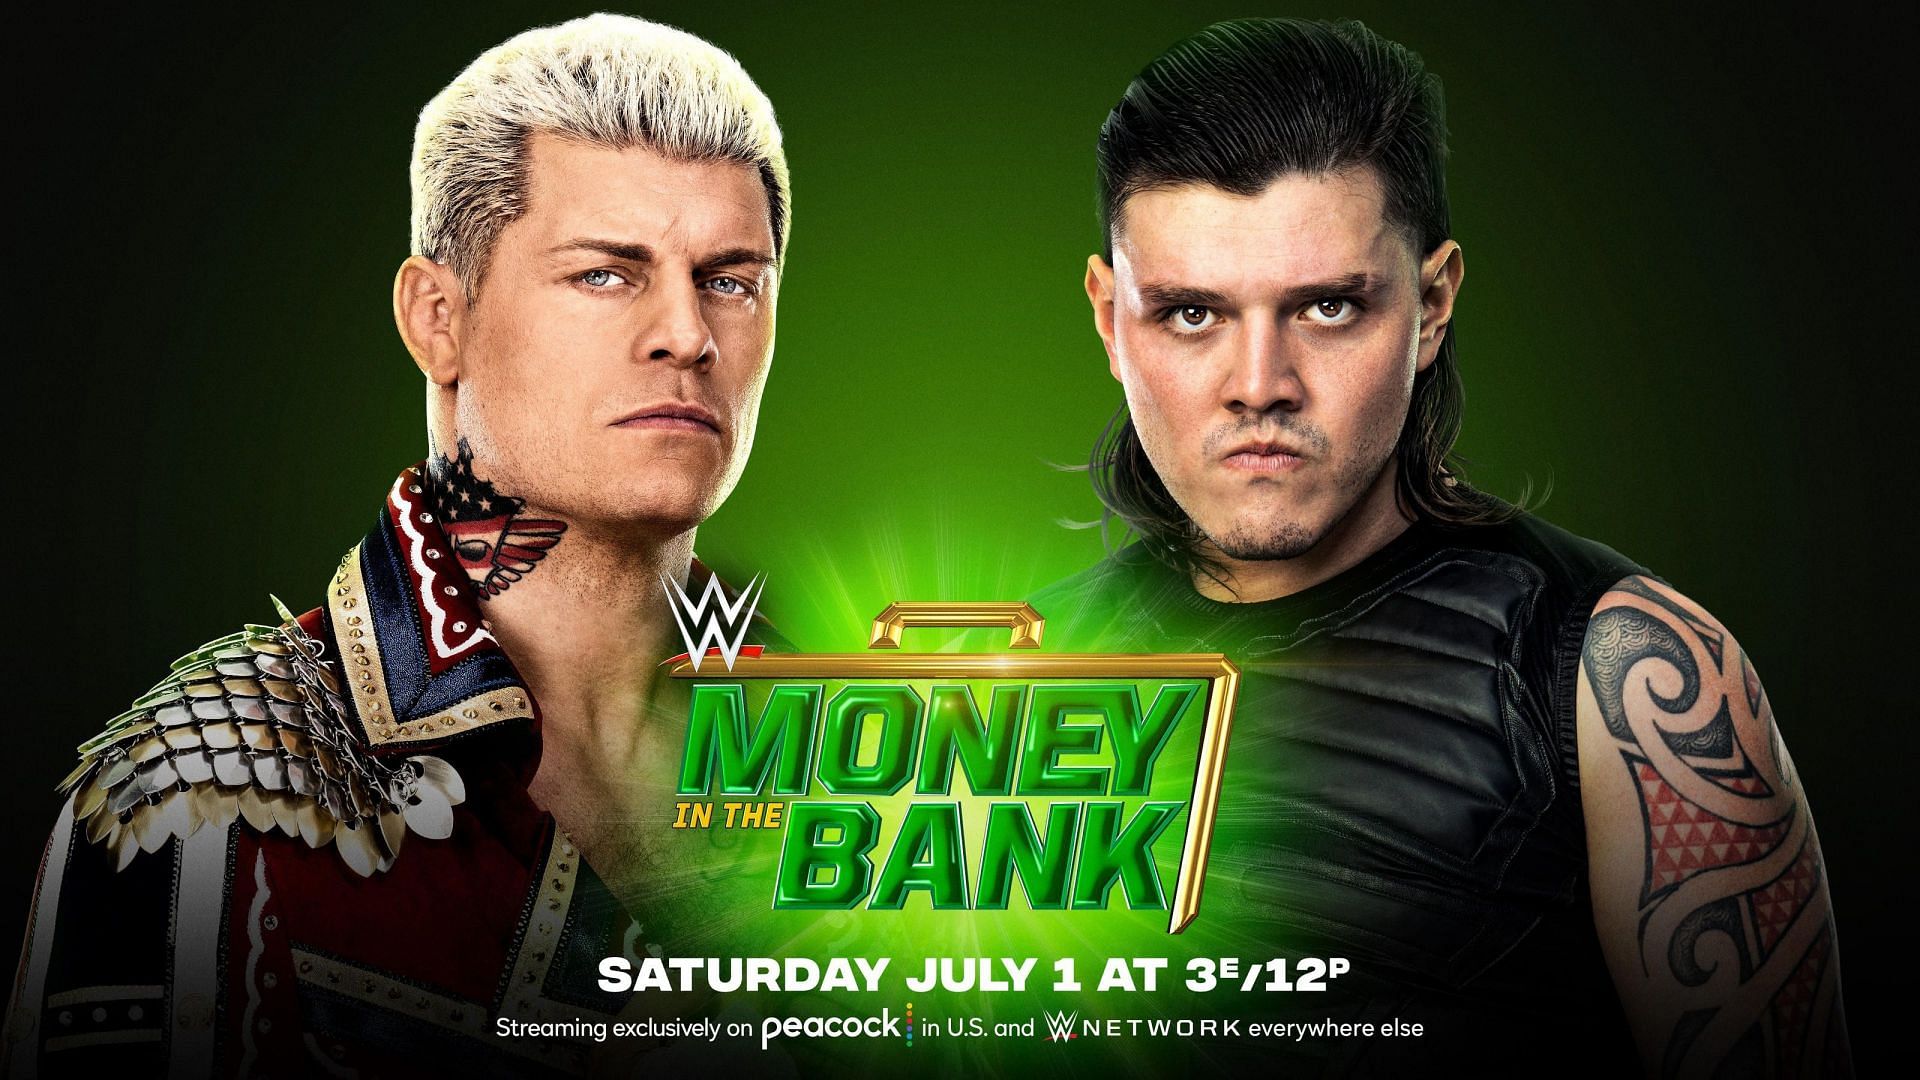 Which storied wrestling family will come out on top at Money in the Bank in London?